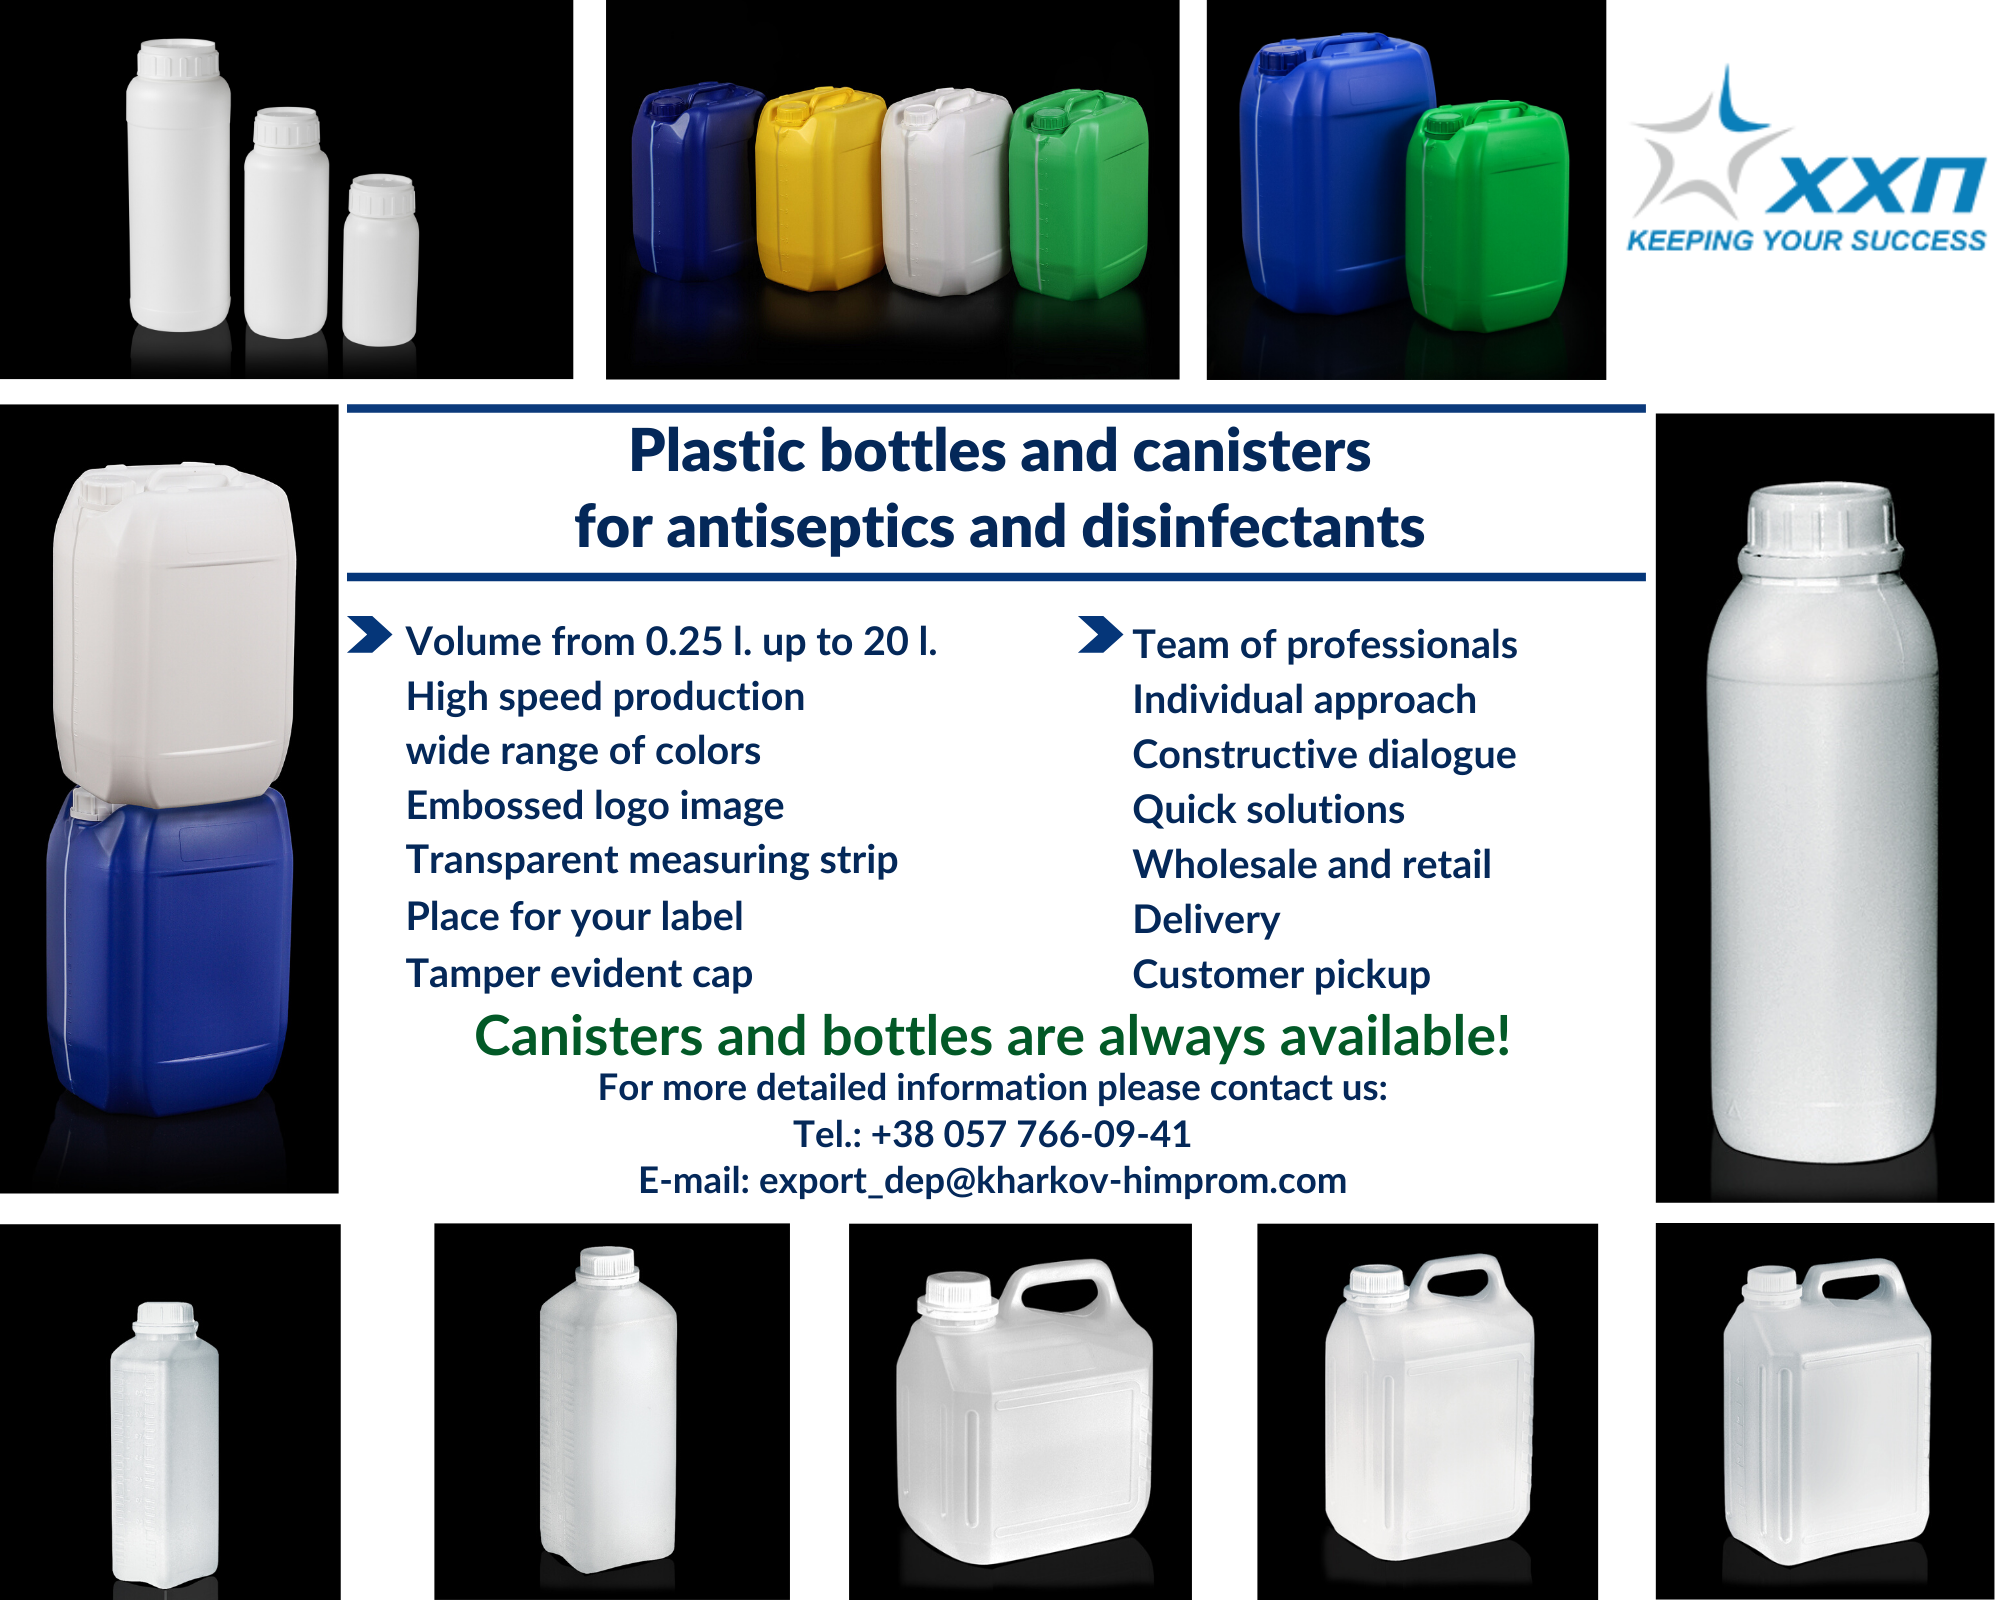 Plastic bottles and canisters for antiseptics and disinfectants